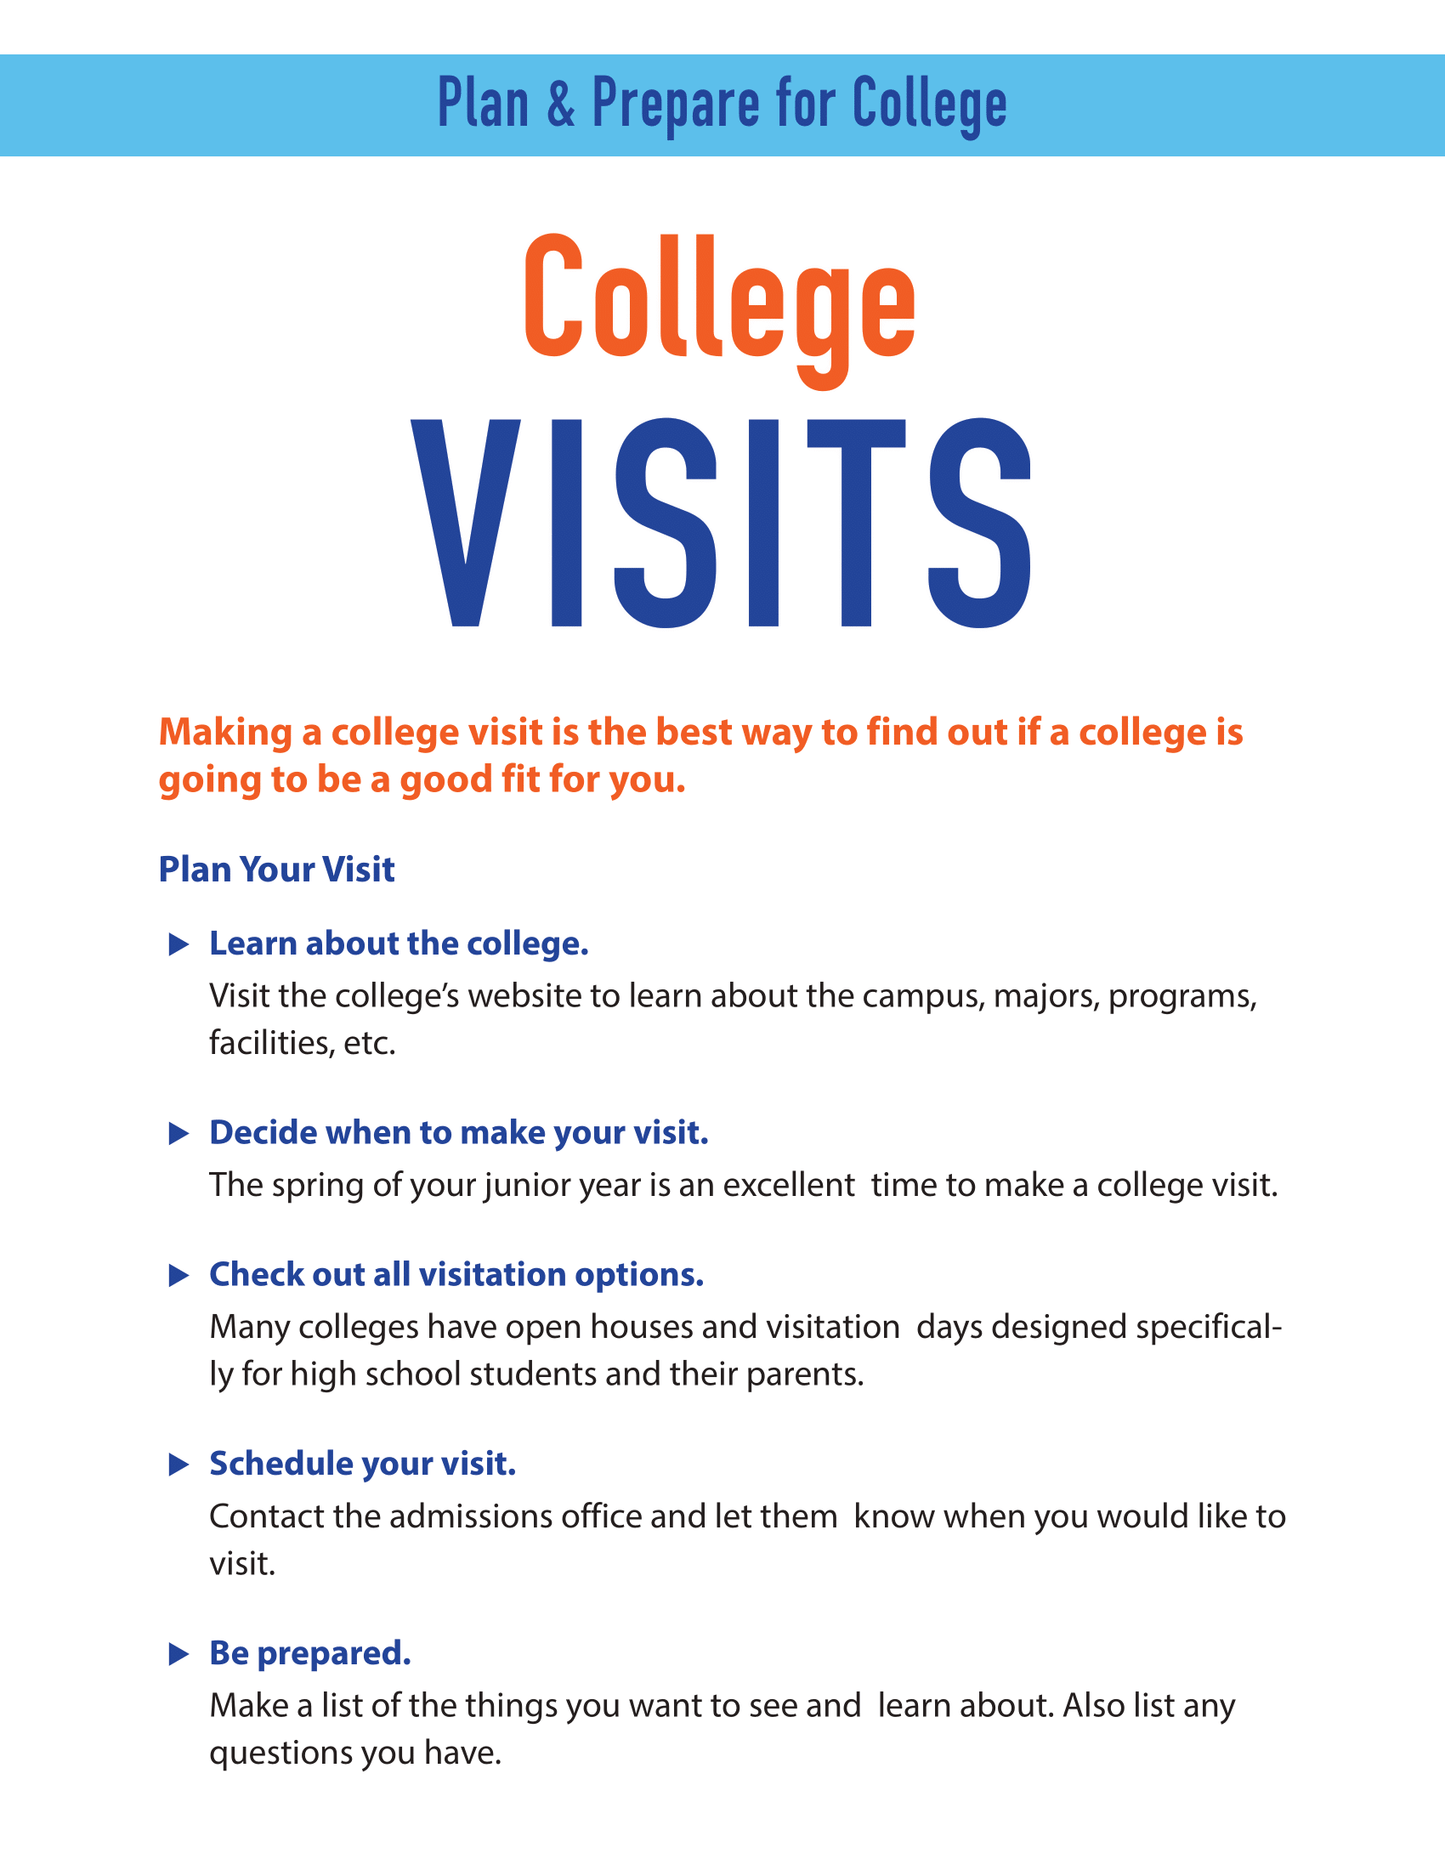 Plan and Prepare for College - College Visits